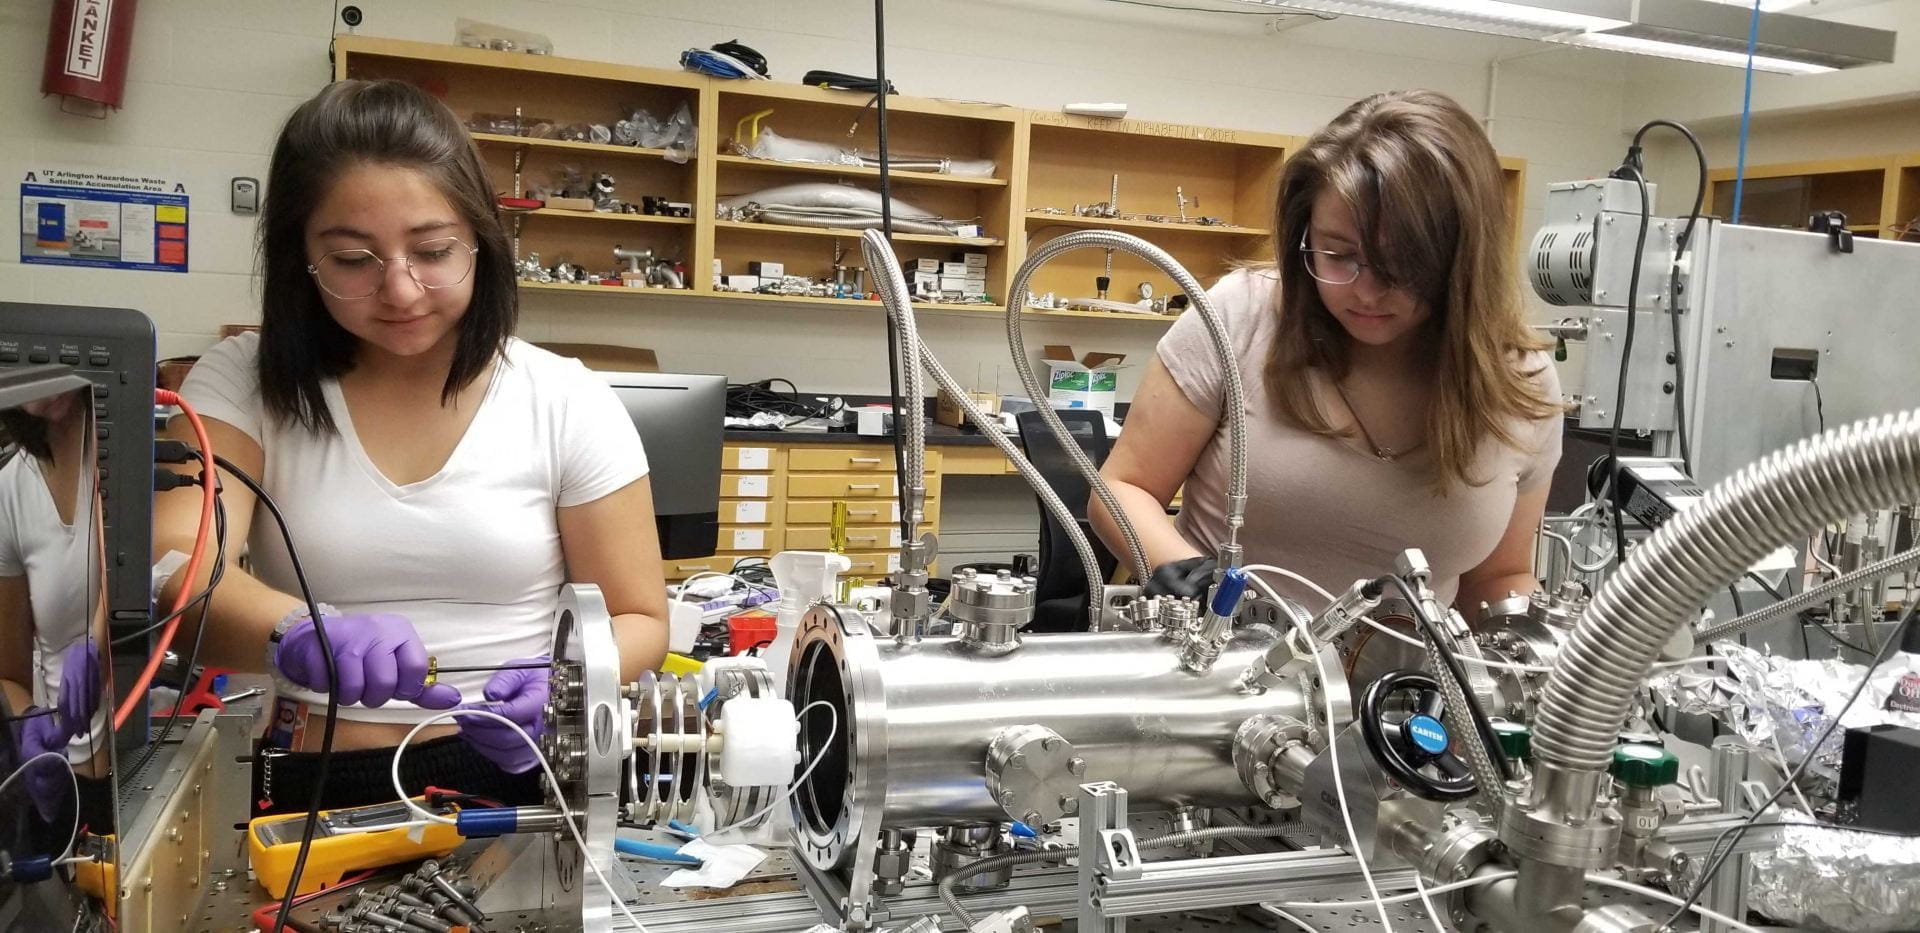 A pair of students work on equipment in a Physics Lab